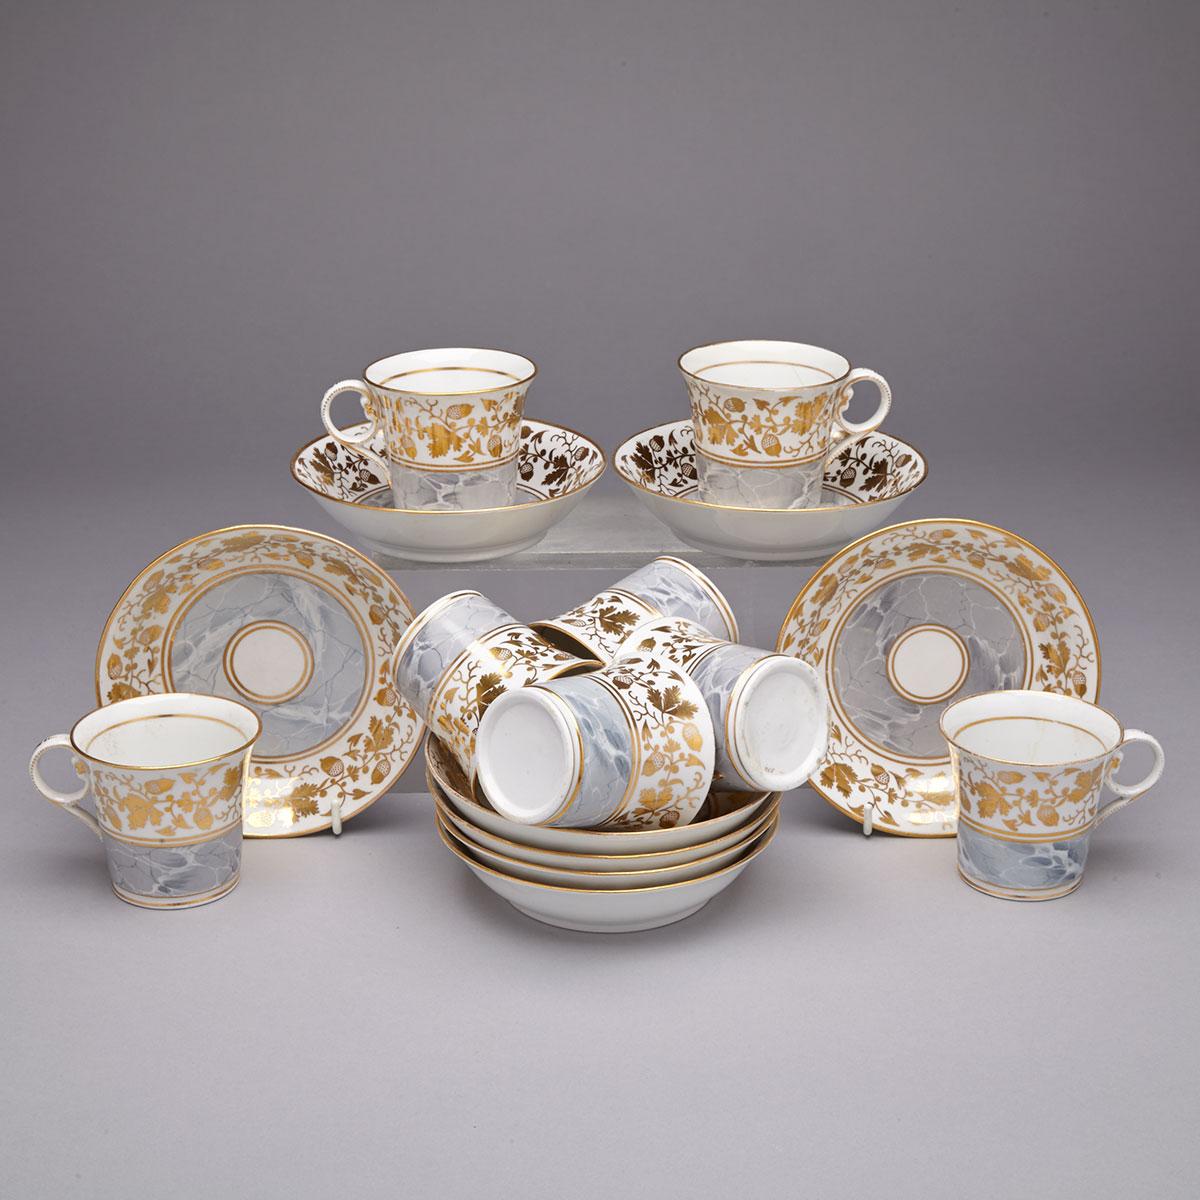 Eight Chamberlain’s Worcester Grey Marbled Ground Coffee Cups and Saucers, c.1815